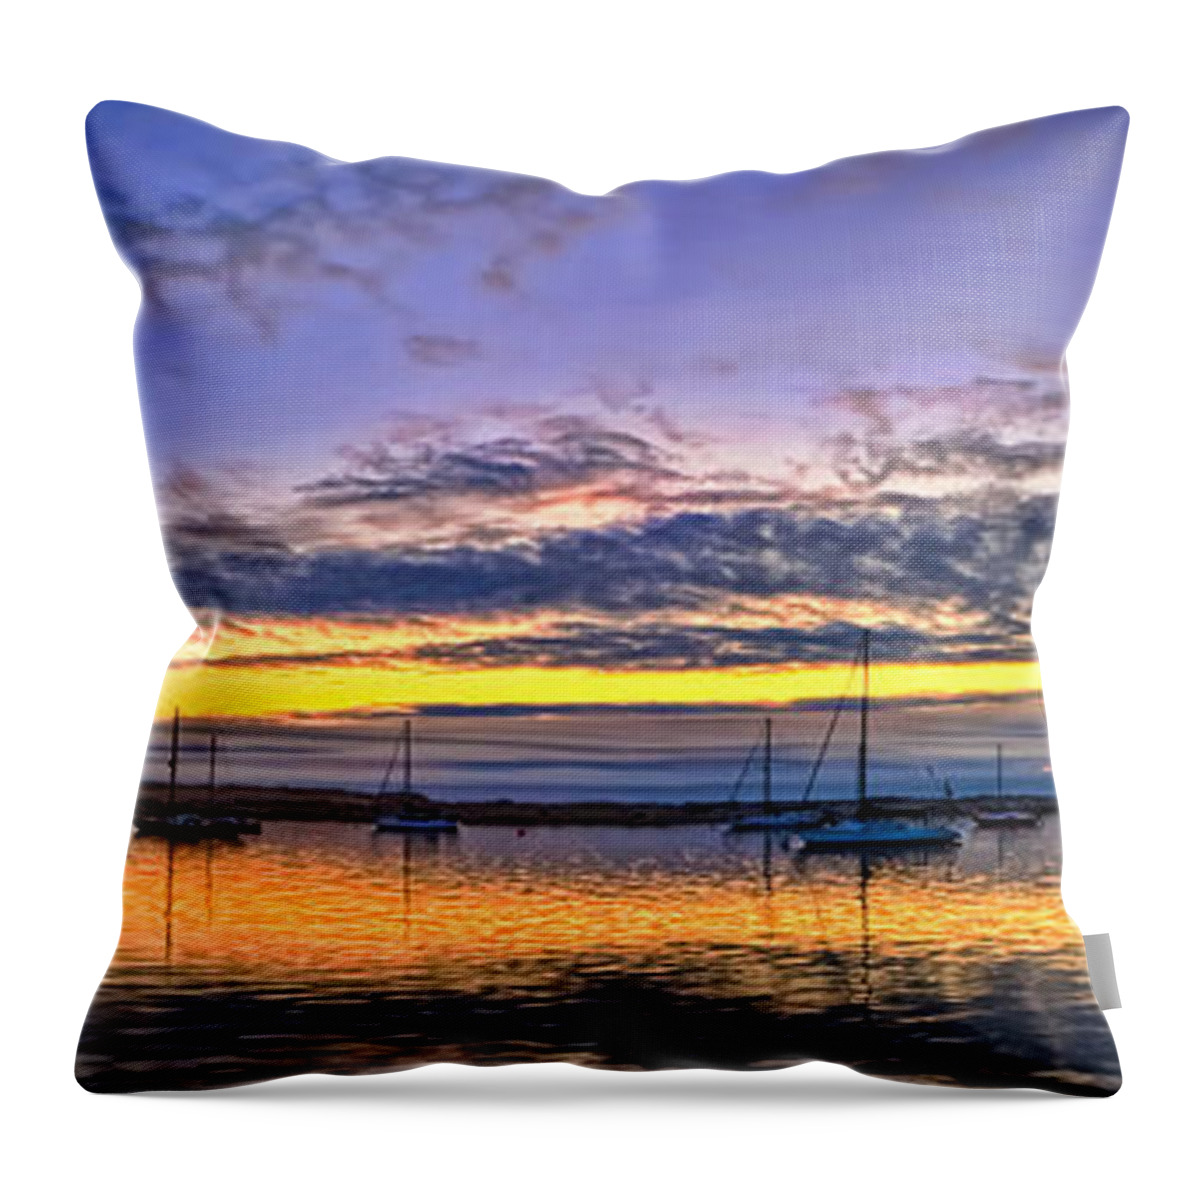 Panorama Throw Pillow featuring the photograph Morro Bay Panorama by Beth Sargent